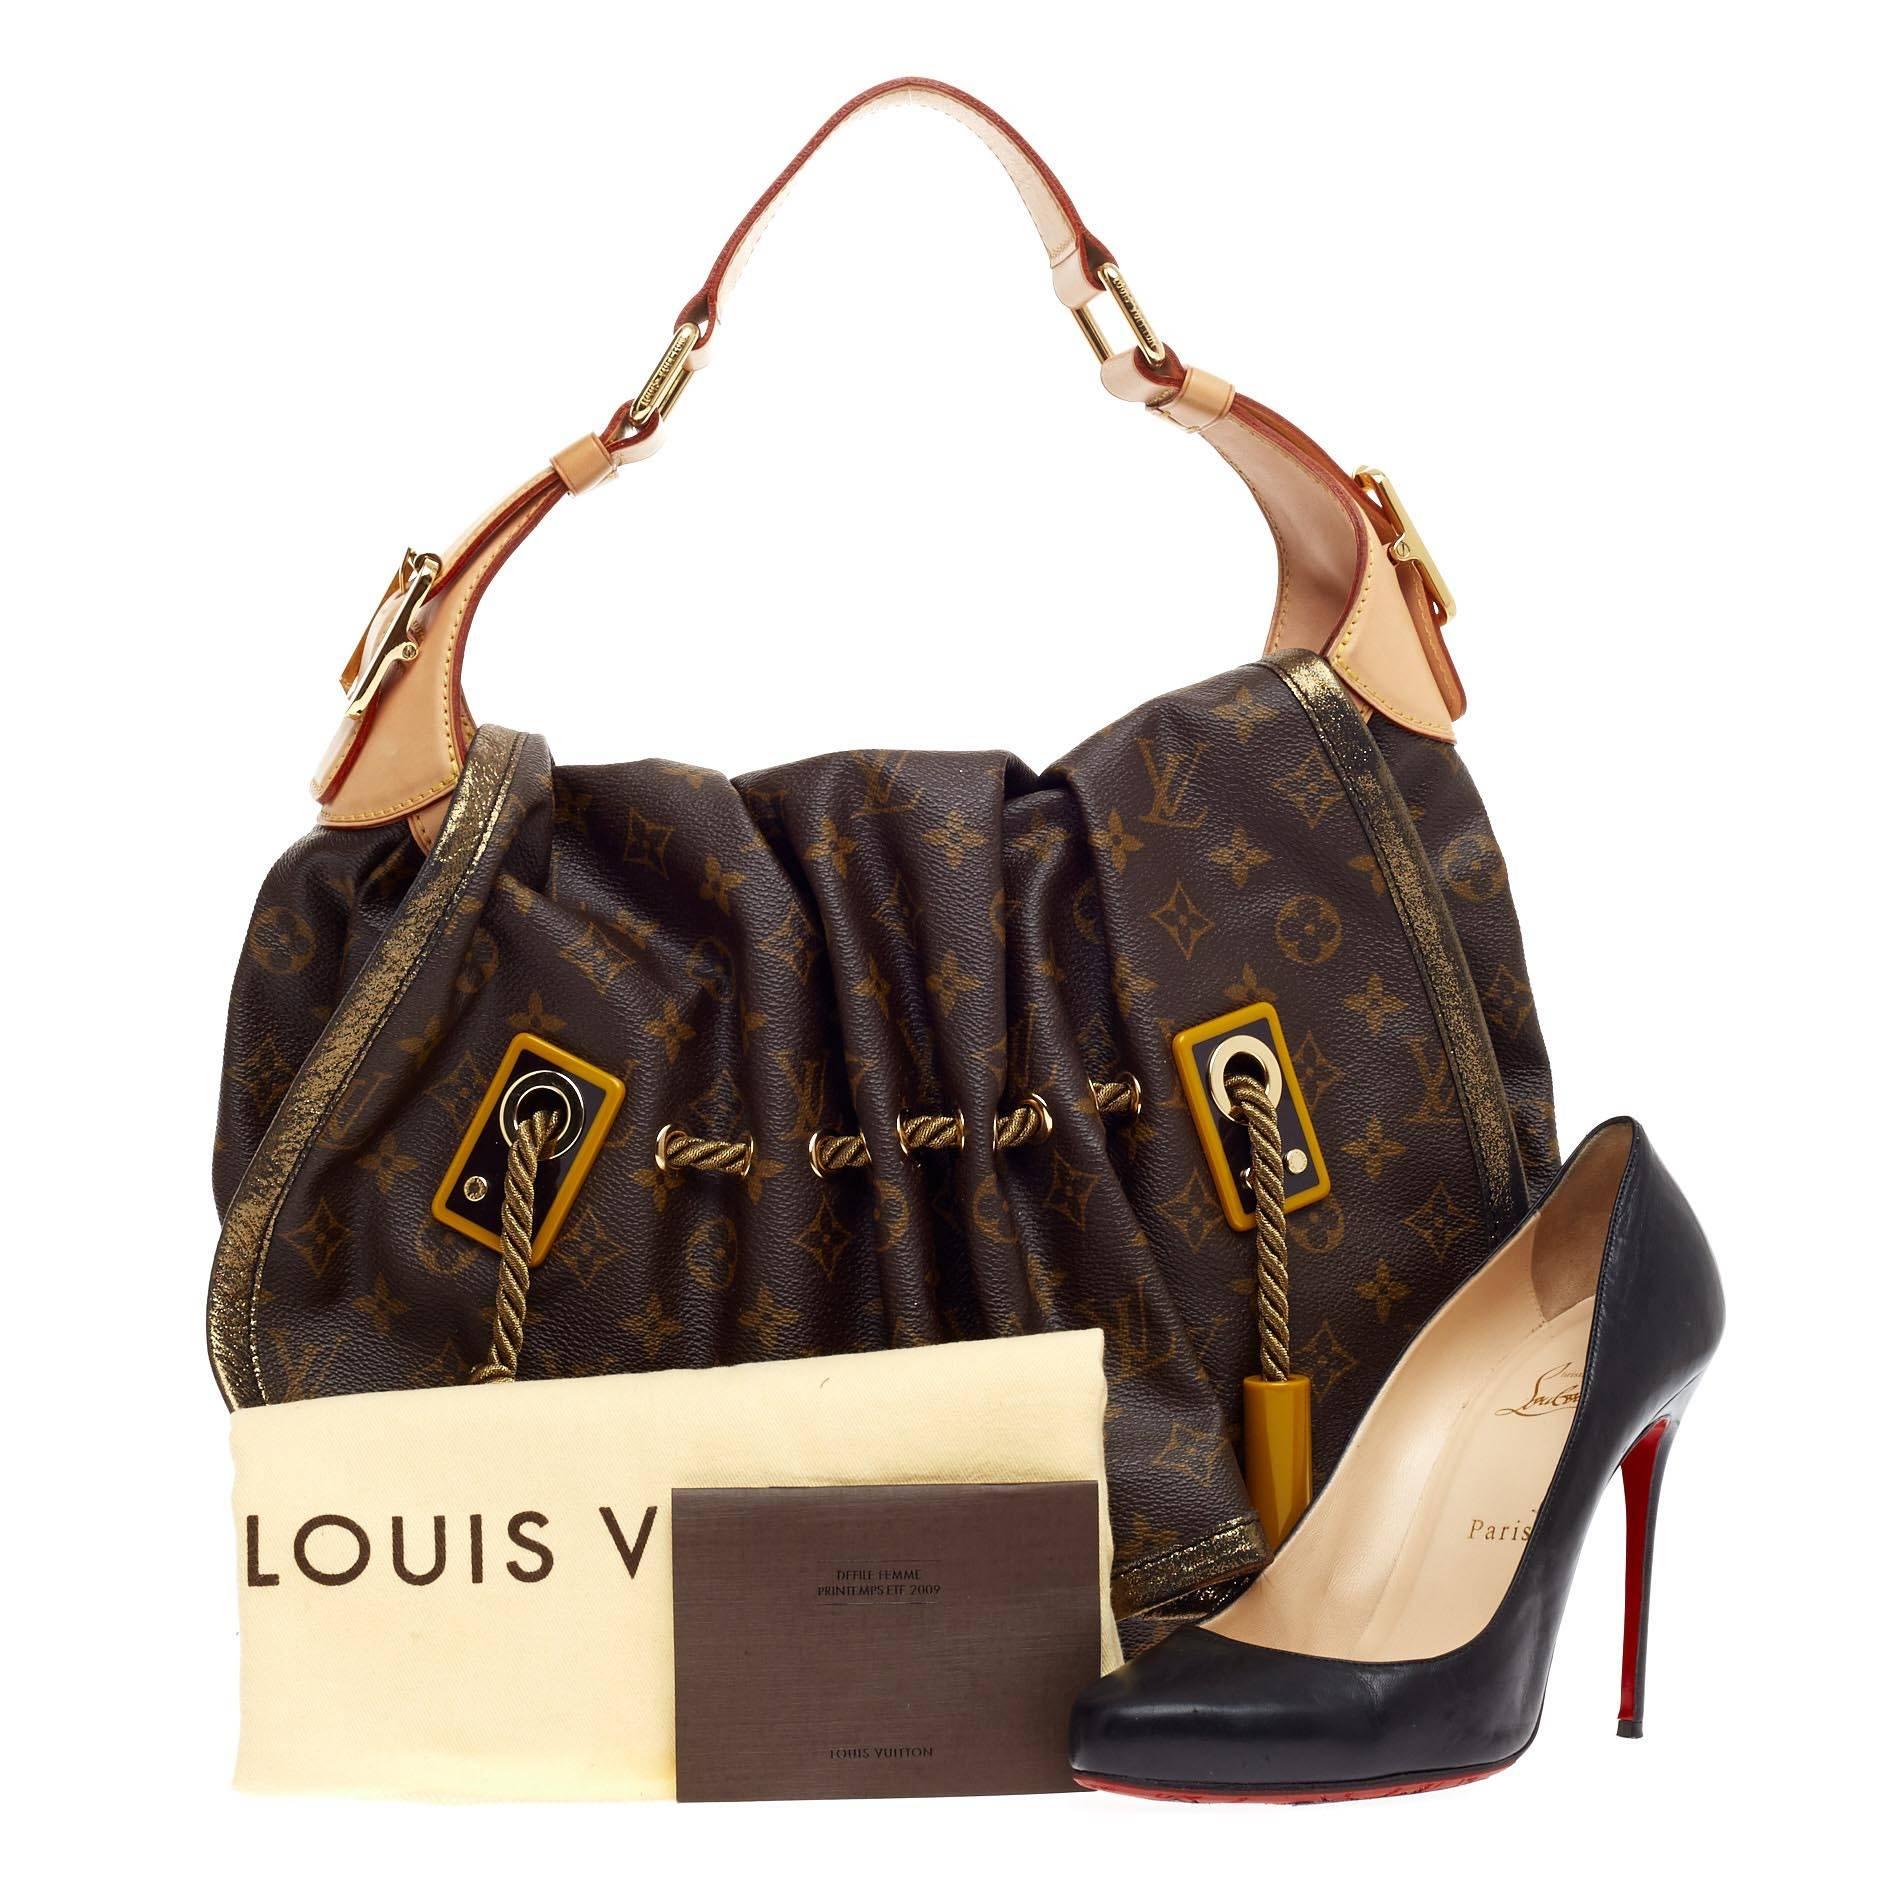 This authentic Louis Vuitton Kalahari Monogram Canvas GM presented in the brand's Spring/Summer 2009 Collection aptly named after the beautiful sub-saharan african desert mixes traditional styling with luxurious ethnic motif. Crafted in iconic